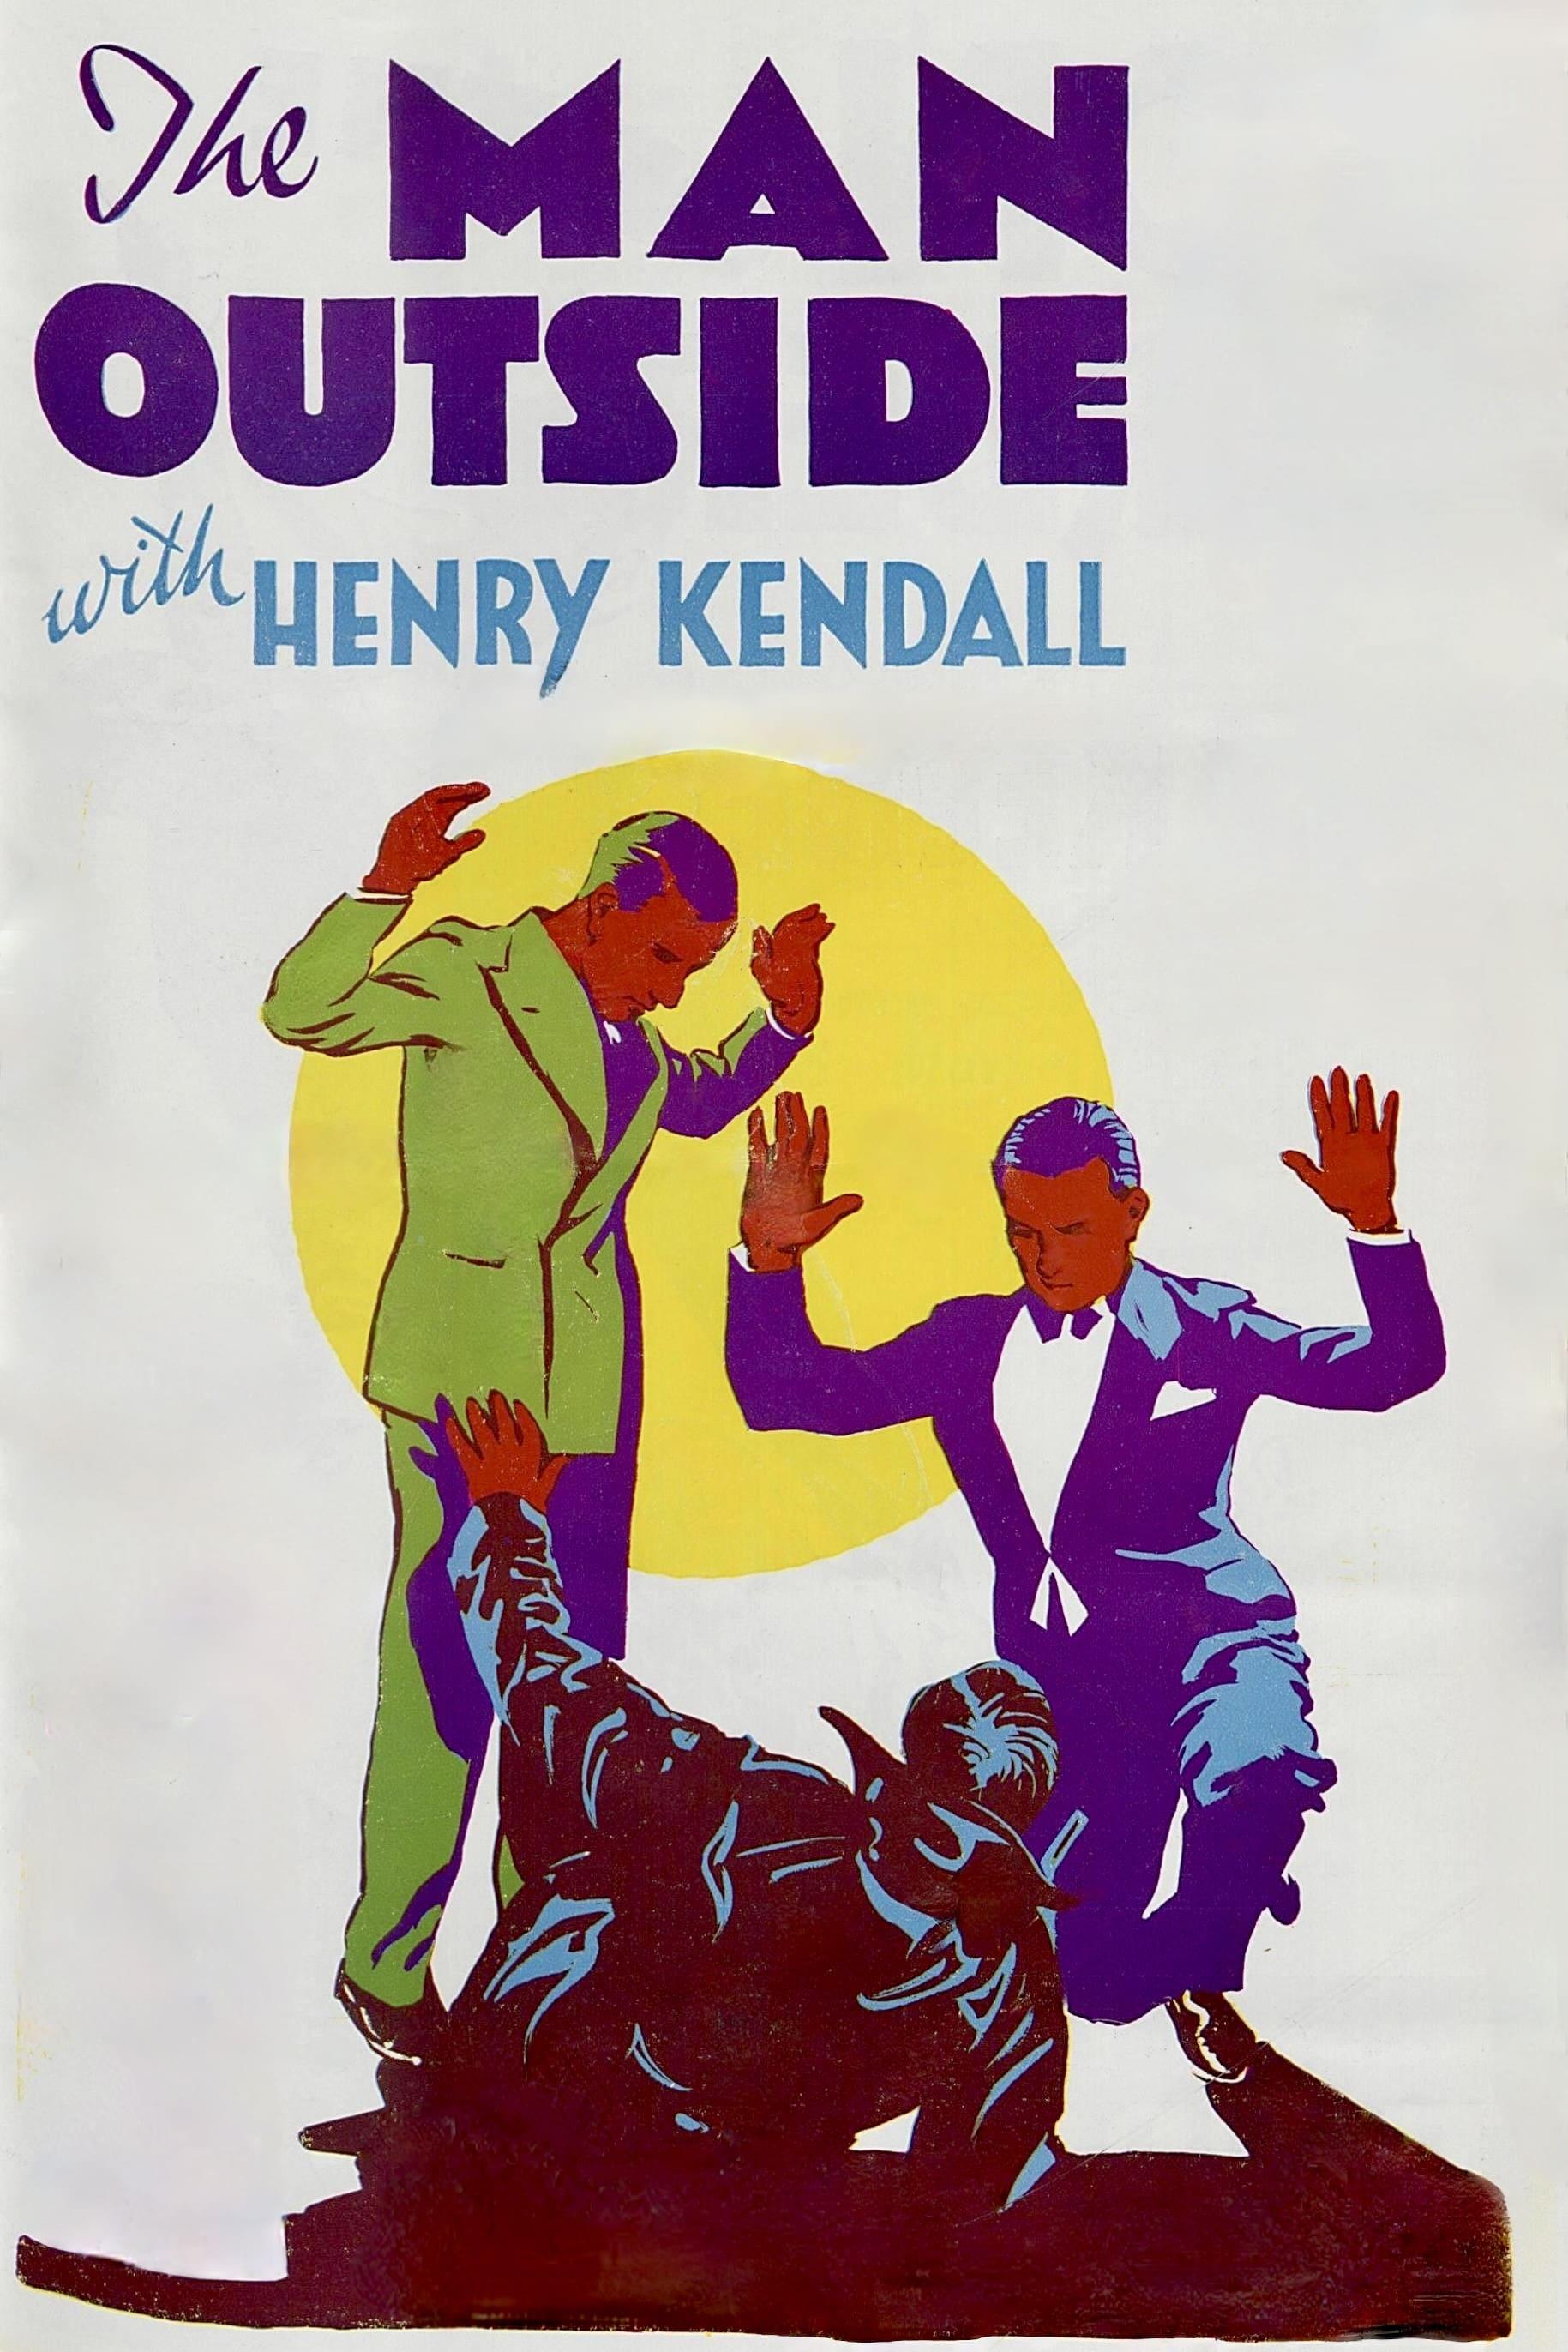 The Man Outside poster